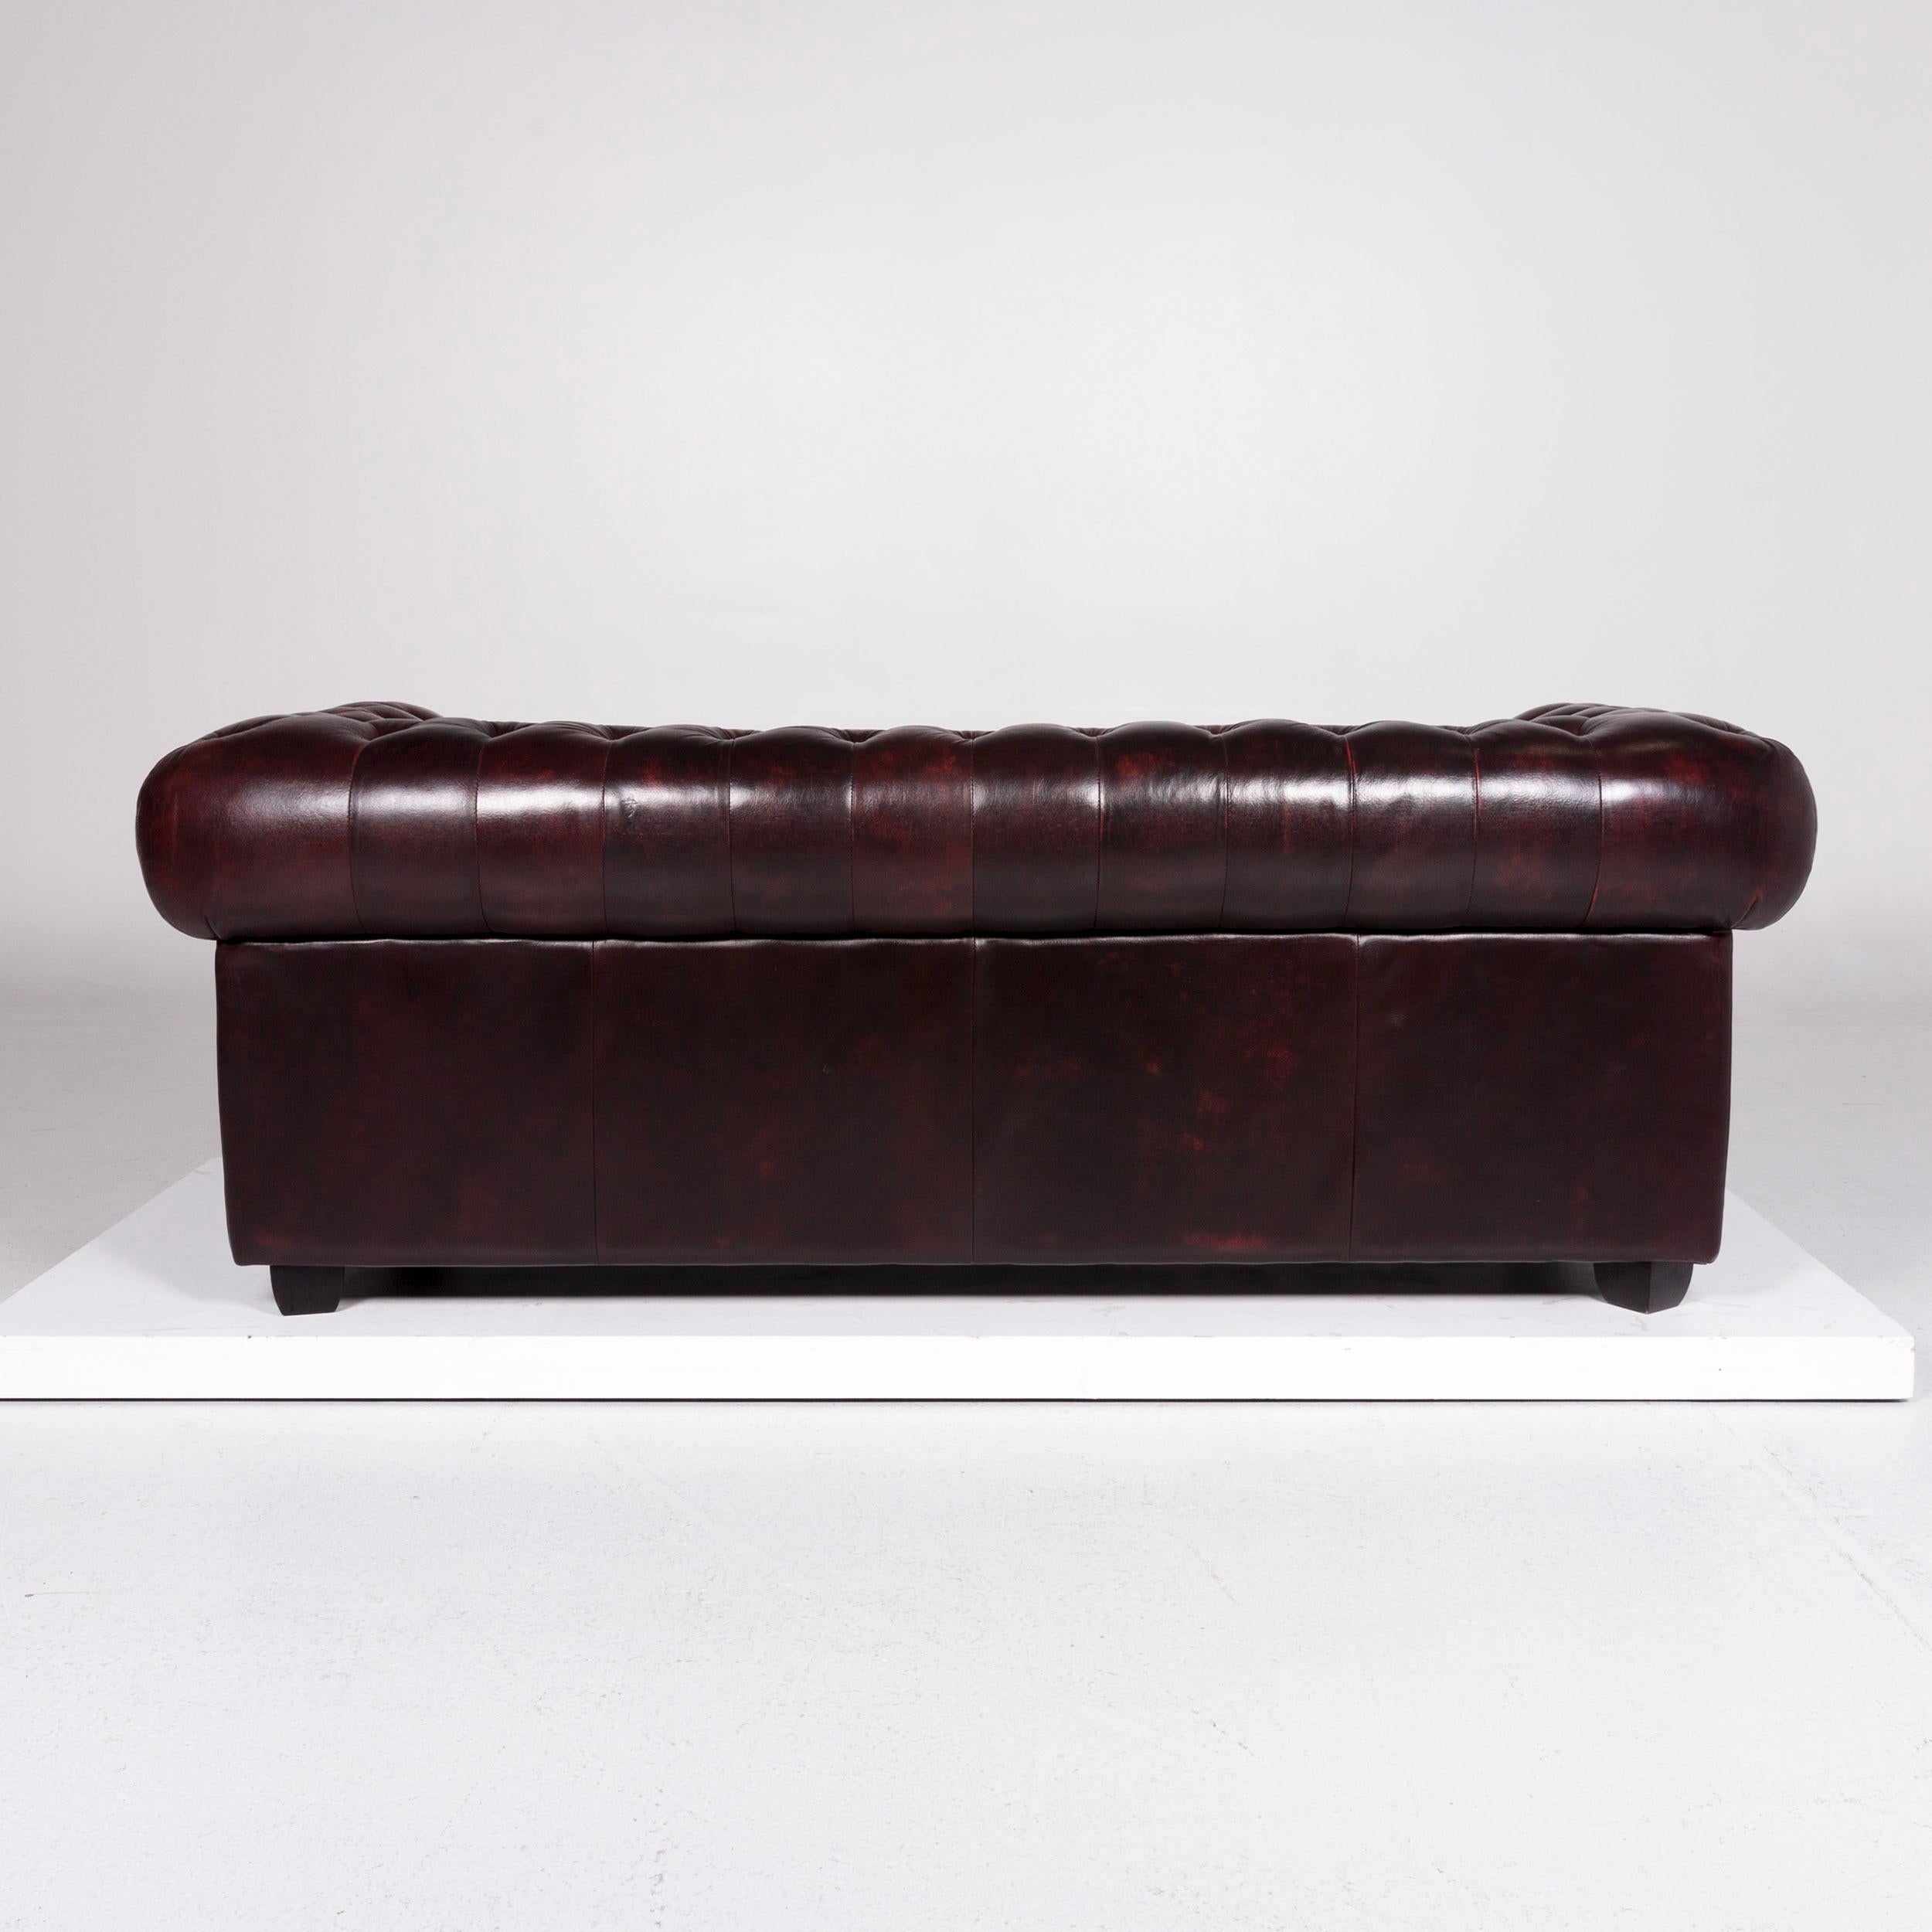 Chesterfield Leather Sofa Red Brown Three-Seat Retro Couch 1